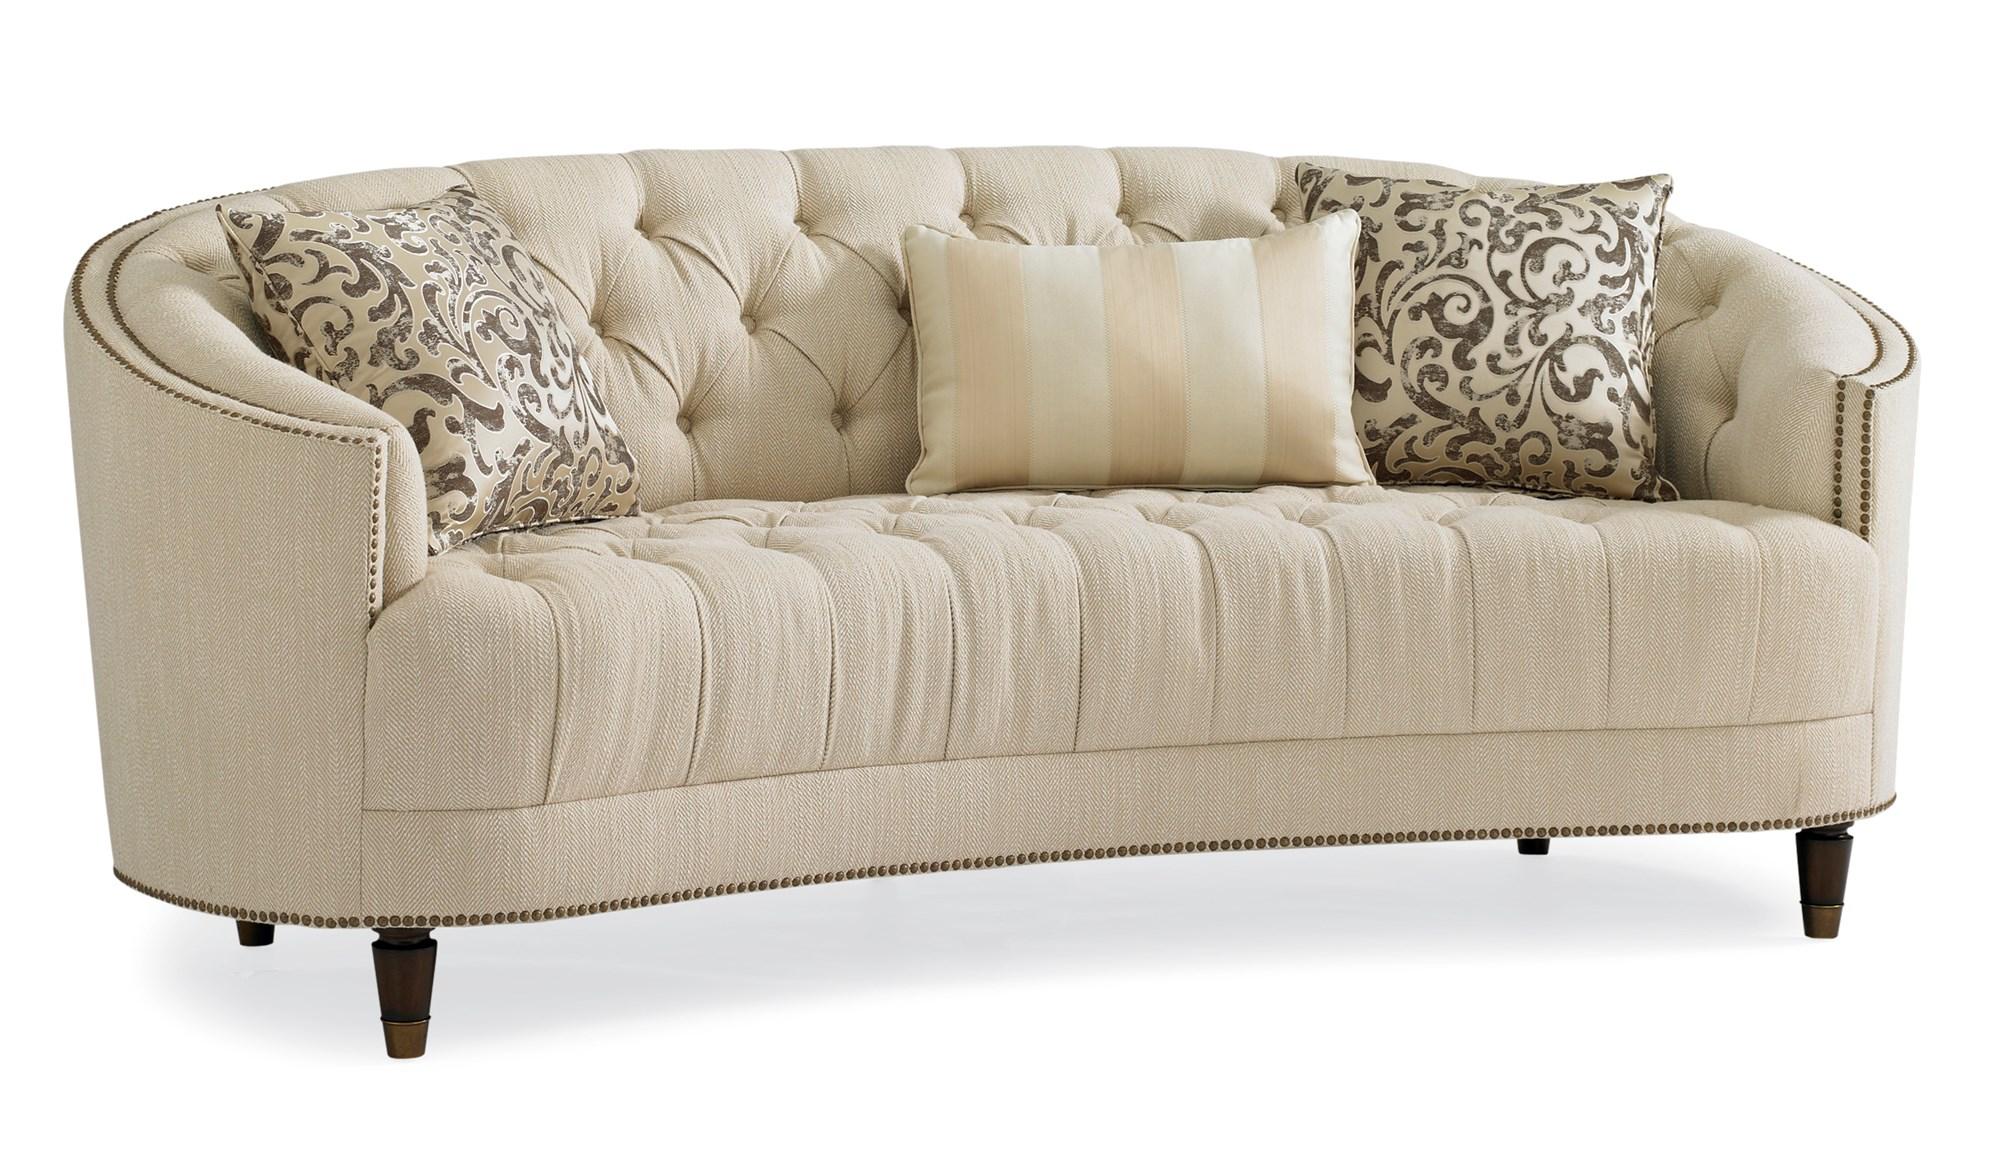 

    
Button-Tufted Natural Textured Herringbone Fabric Sofa CLASSIC ELEGANCE by Caracole
